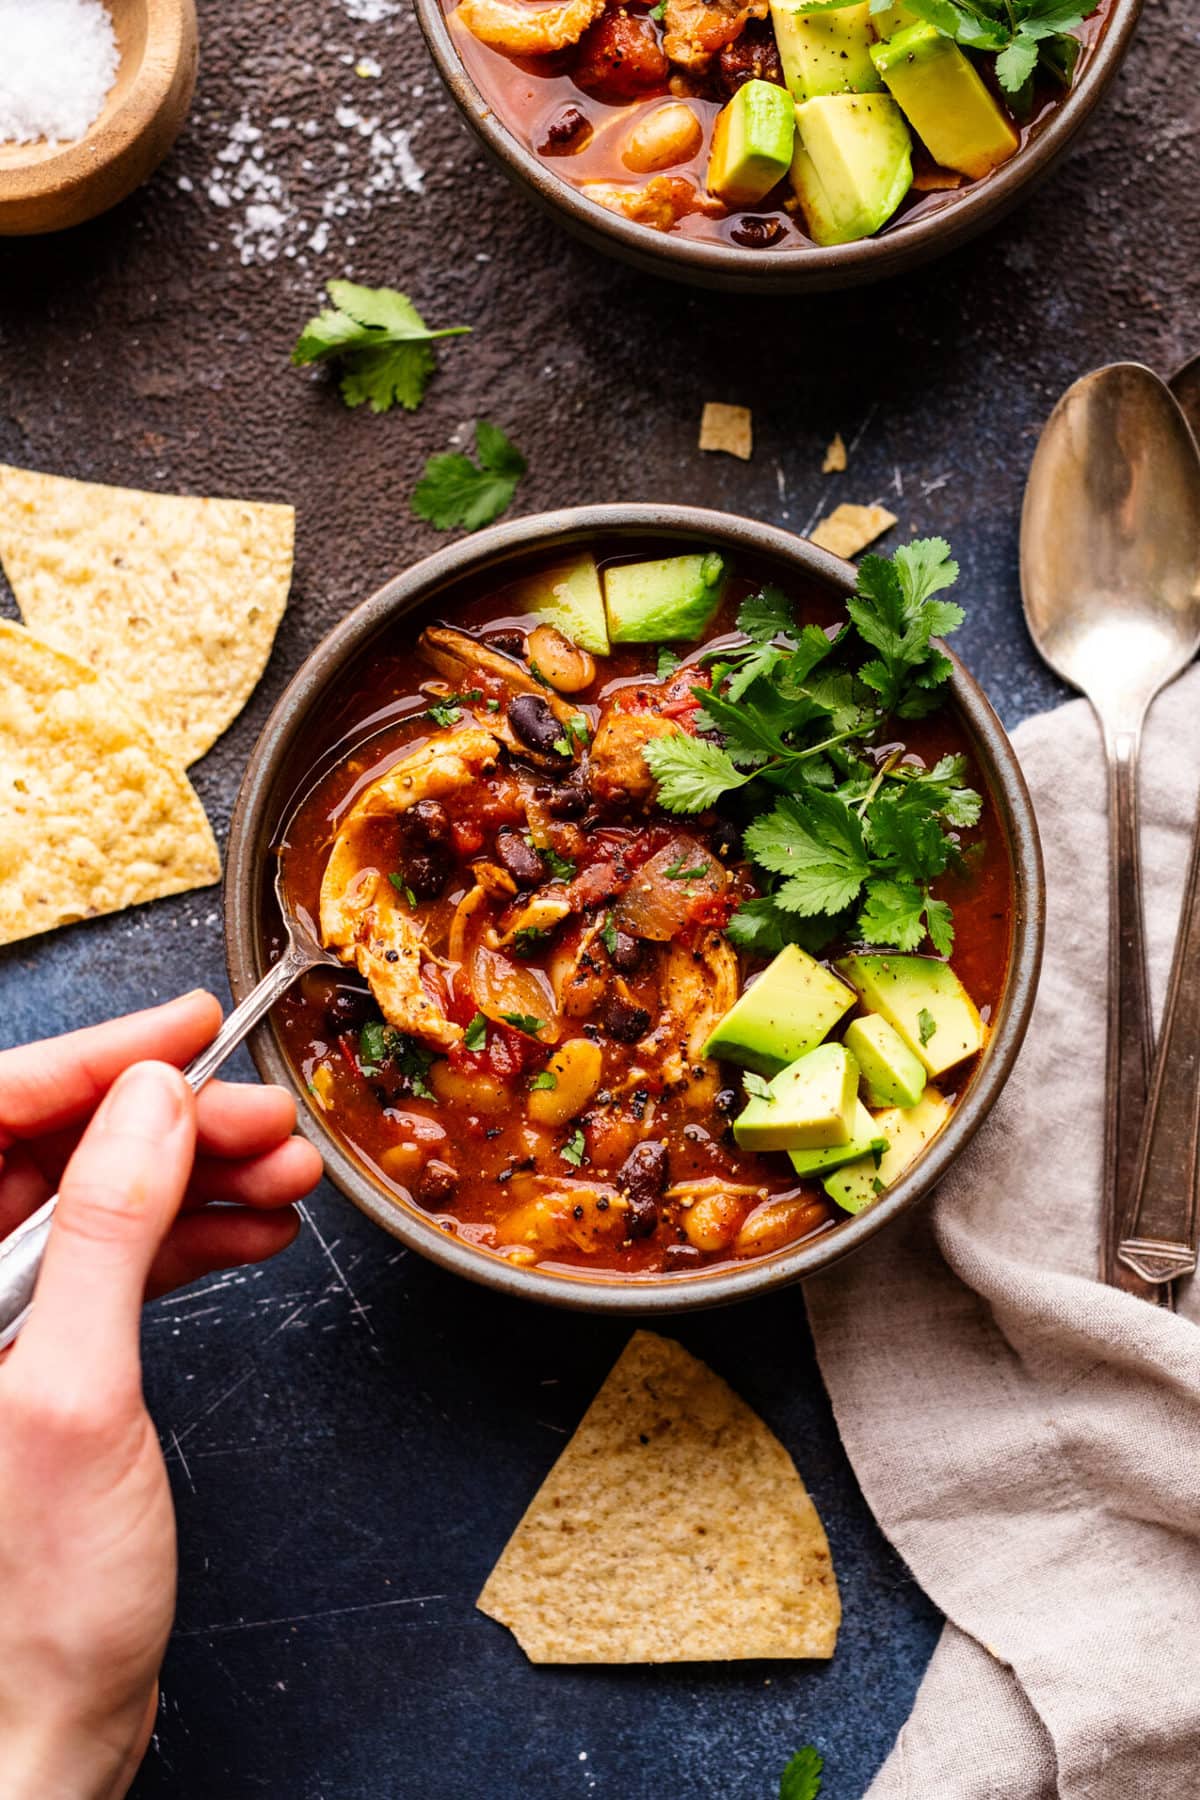 A hand holding a spoon and scooping out a spoonful of chicken chili topped with cilantro and avocado.